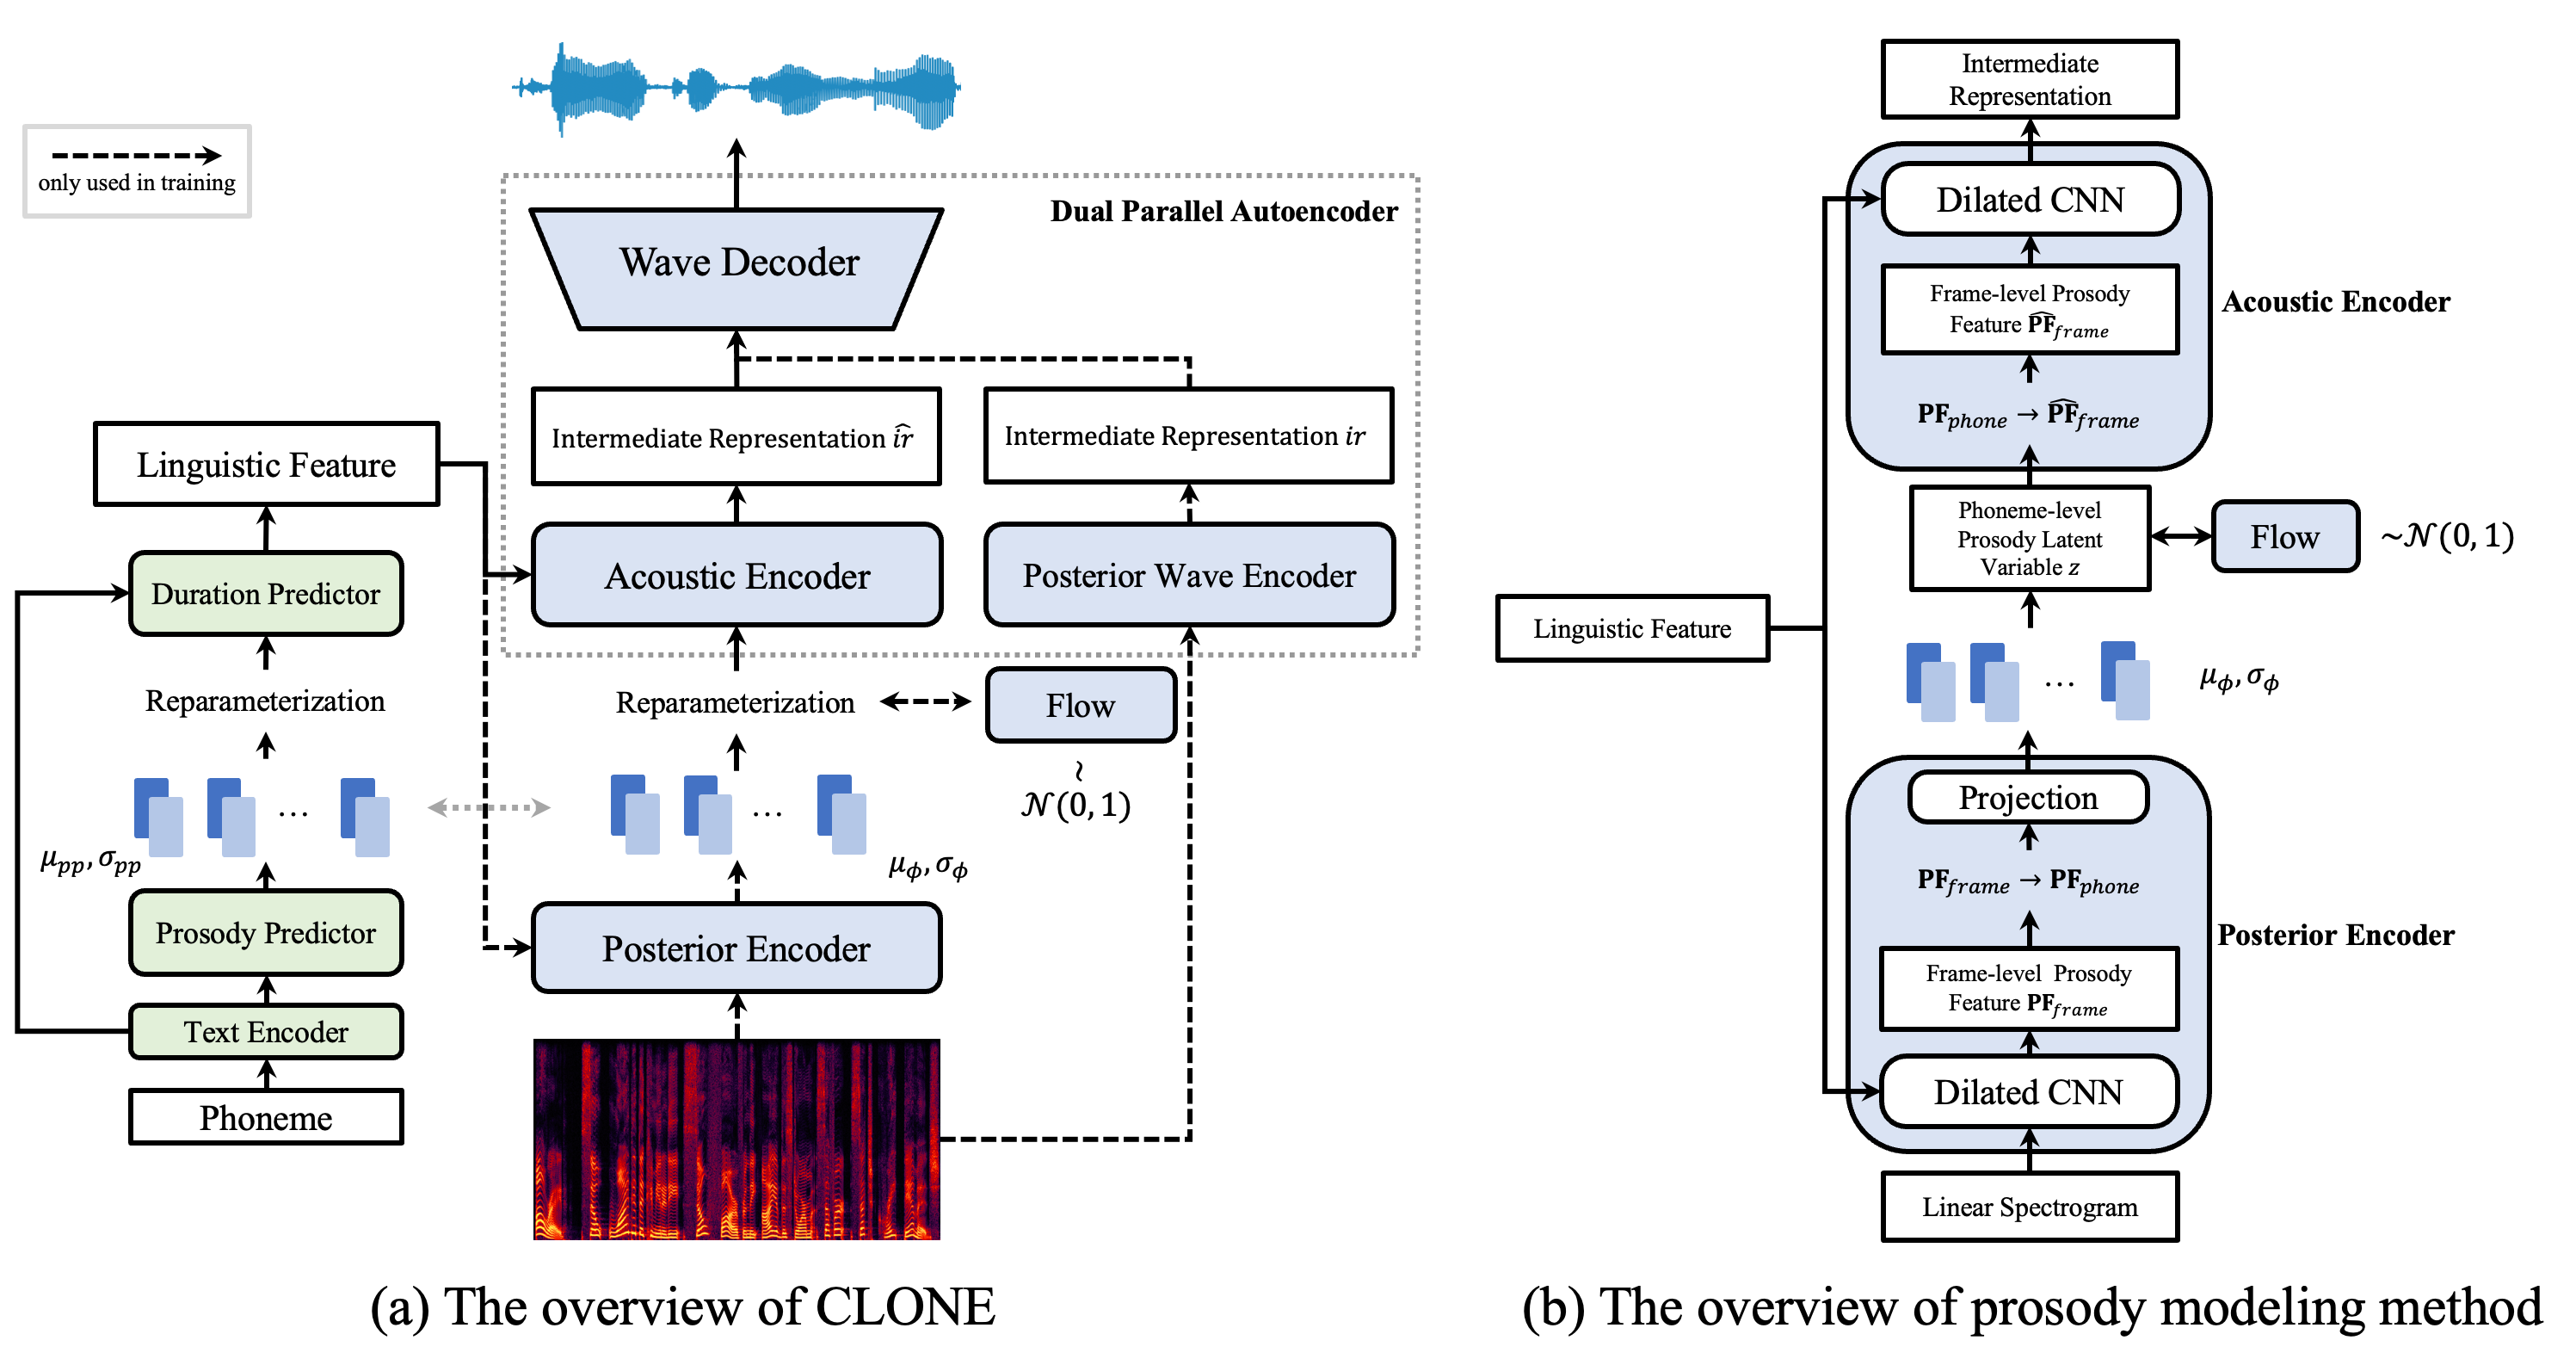 The Overview of CLONE